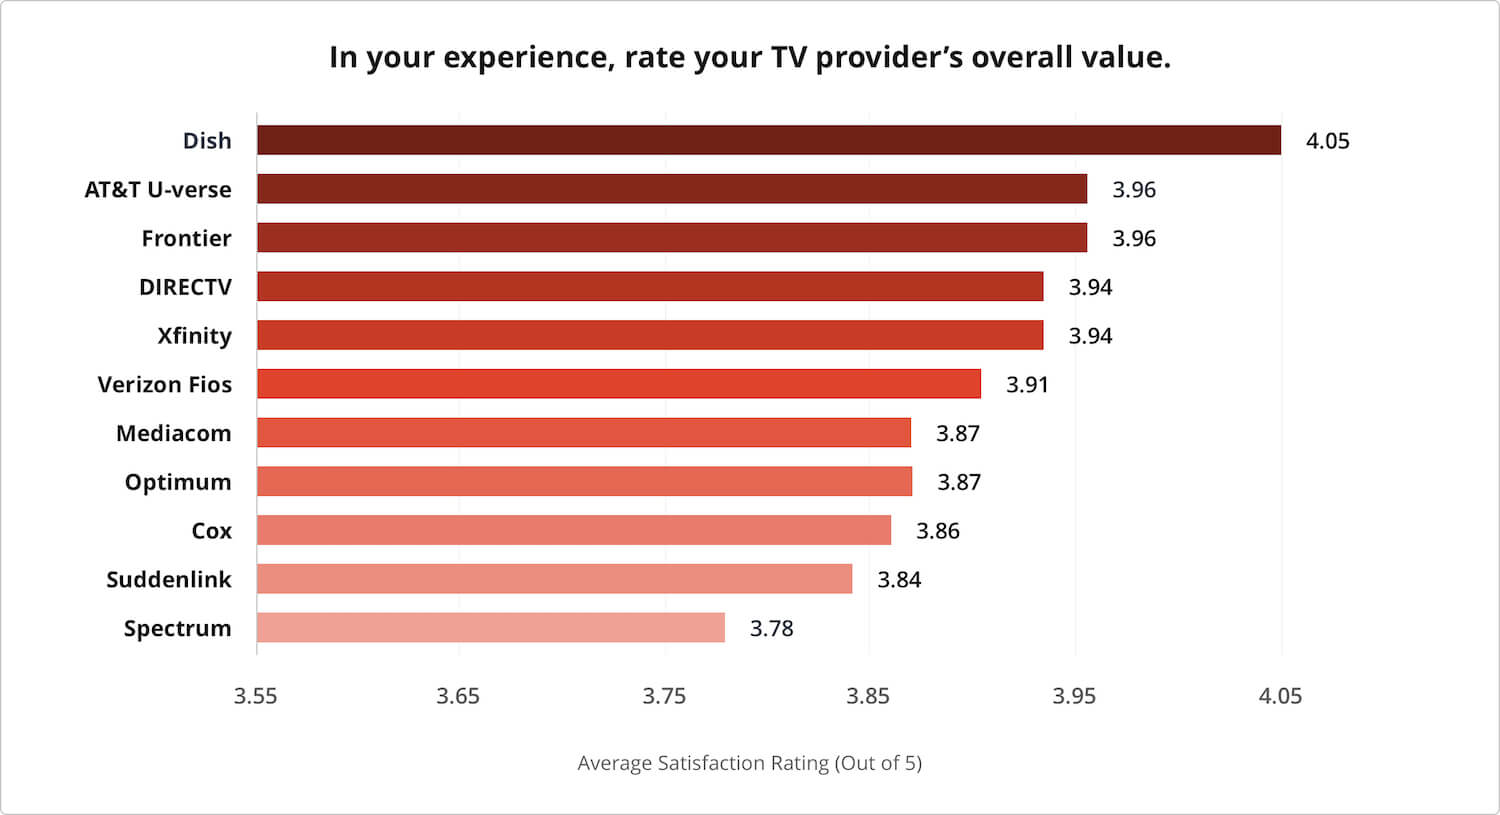 Satisfaction rating of people's TV provider's overall value